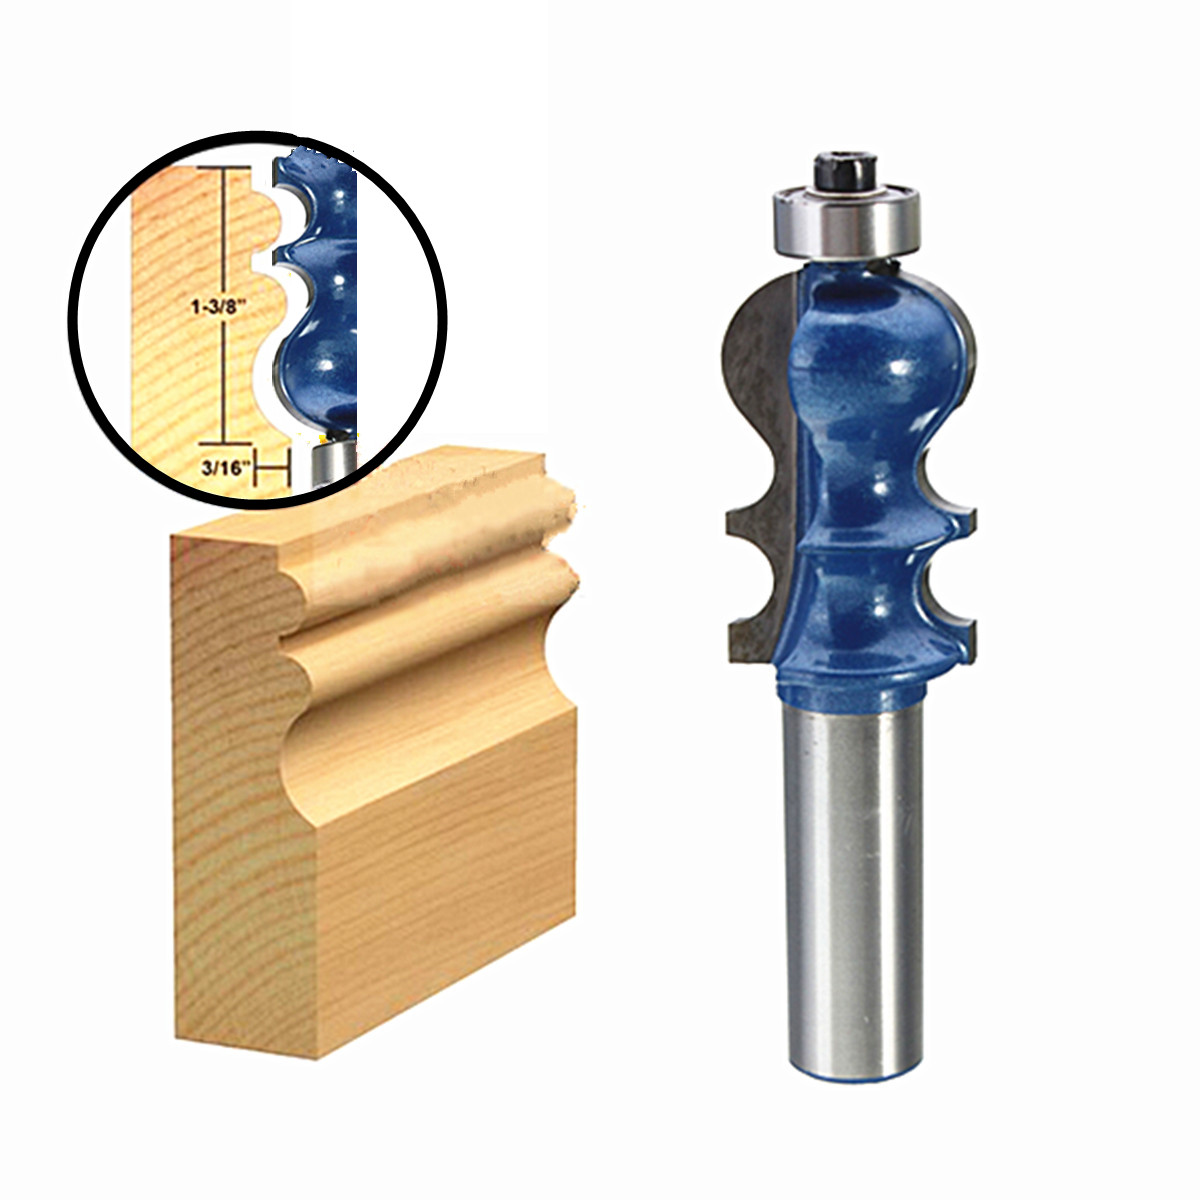 

Drillpro RB25 1/2 Inch Shank Router Bit Carbide Woodworking Cutter Engraving Trimming